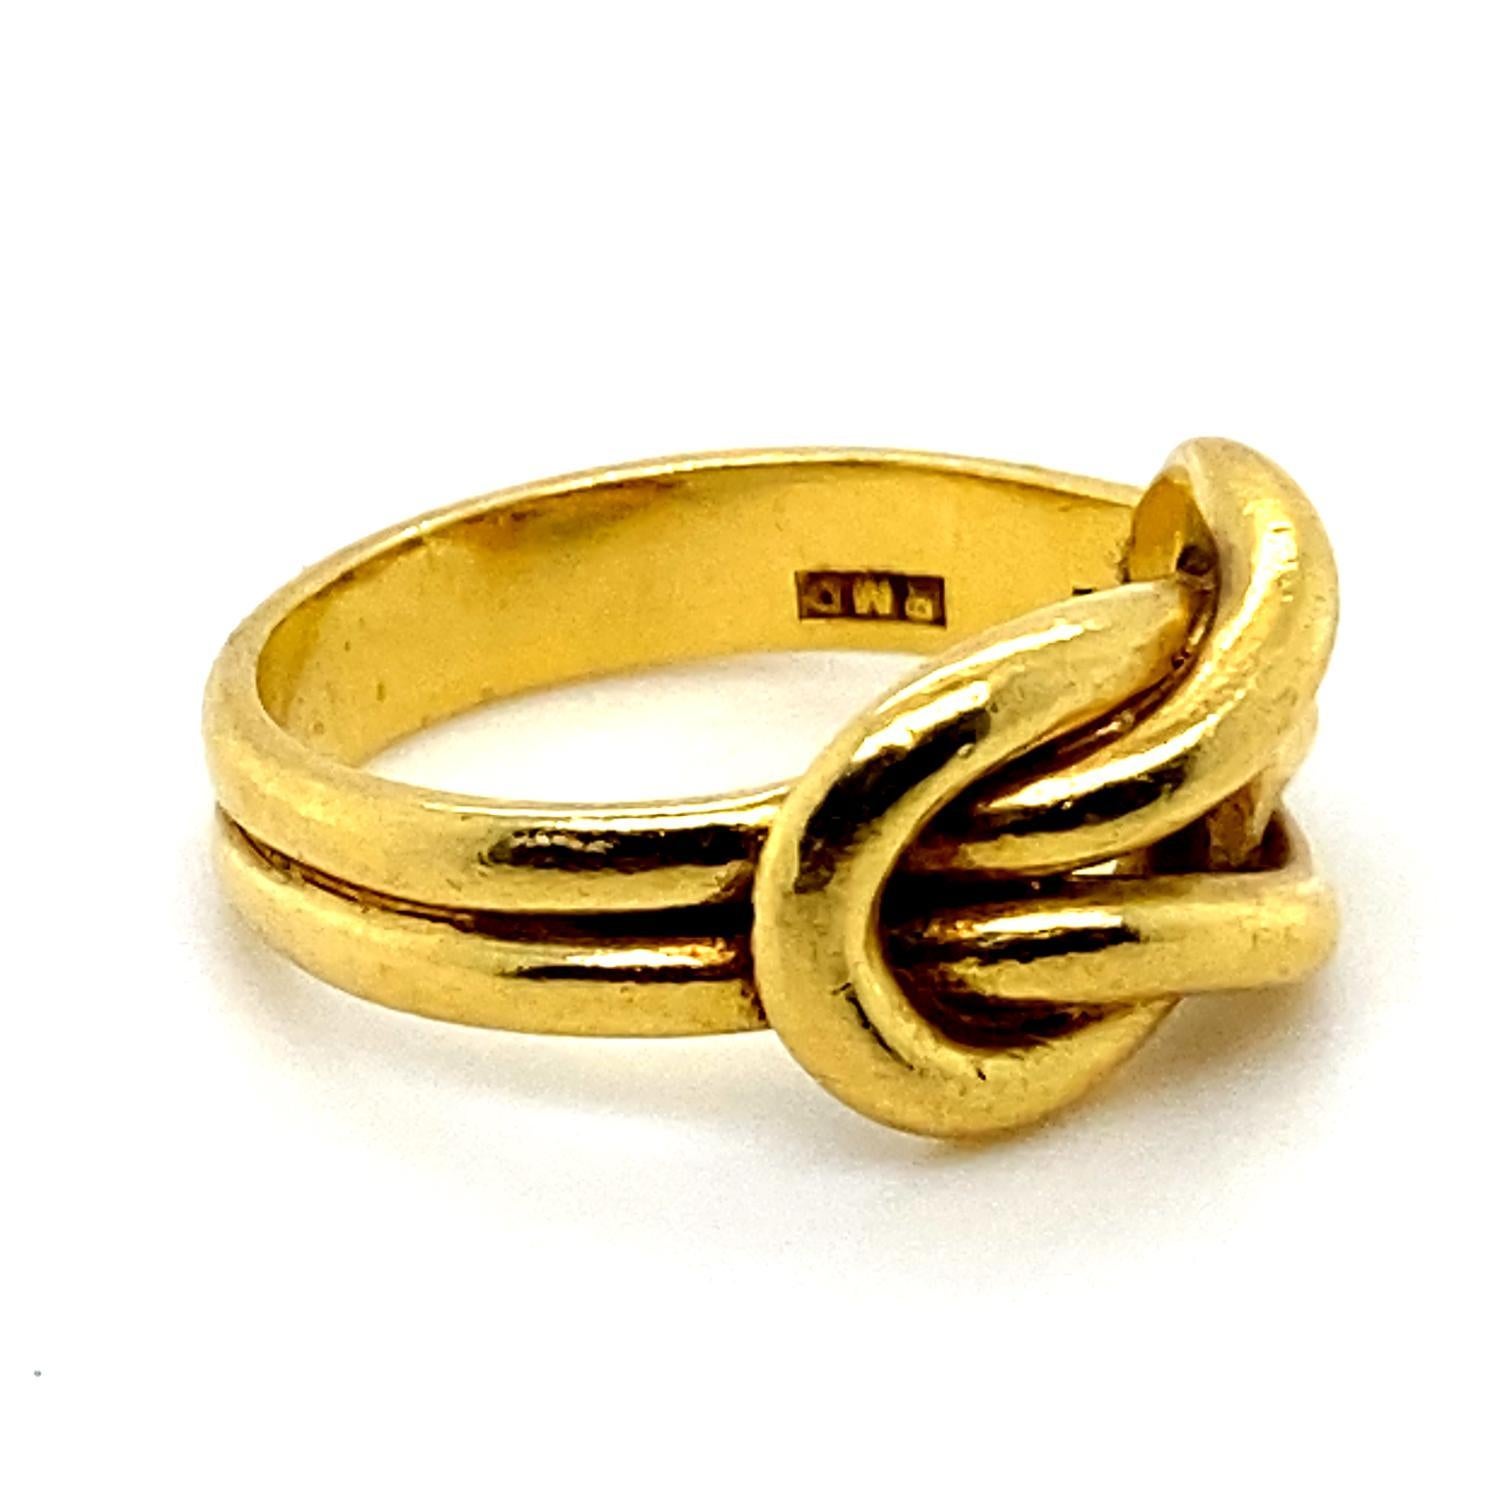 A Lovers Knot ring in 18 karat yellow gold.

This elegant and simple ring is designed as a Lovers Knot in plain polished yellow gold.

The Lovers Knot represents the enduring and unbreakable connection between two lovers.

This symbol and its